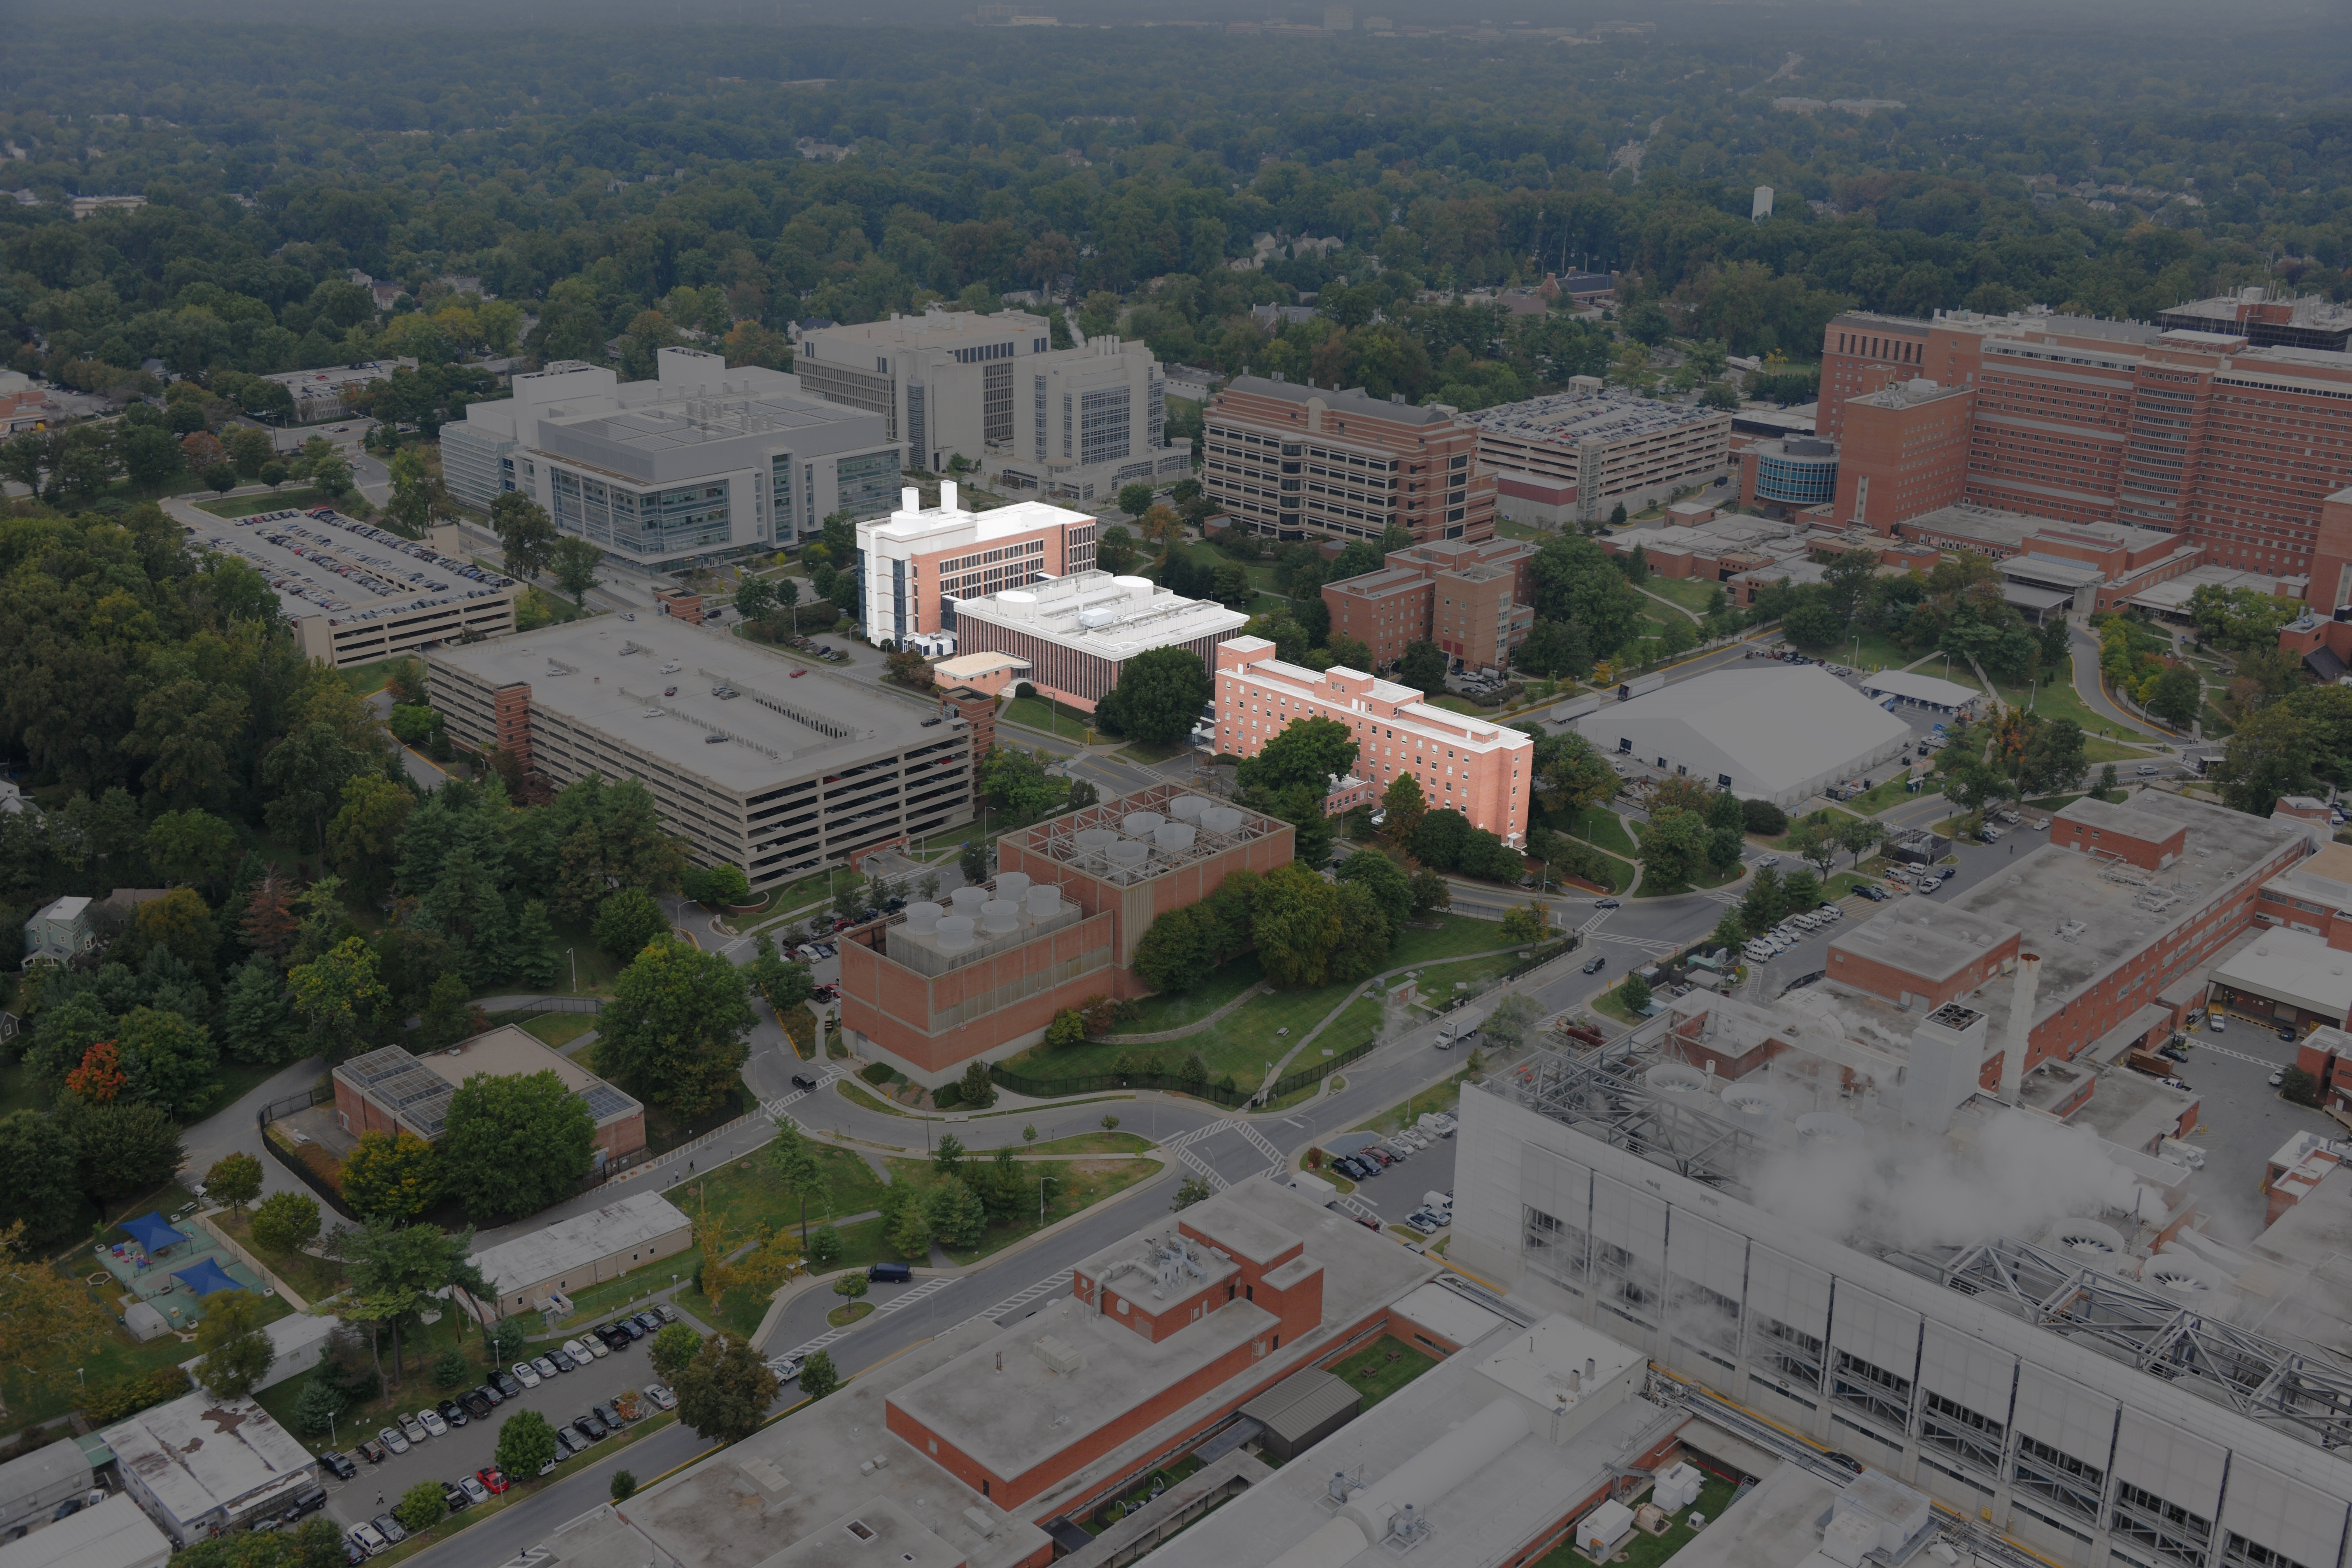 Aerial Image of the NIH campus taken in 2014 with Buildings 29, 29A, and 29B highlighted